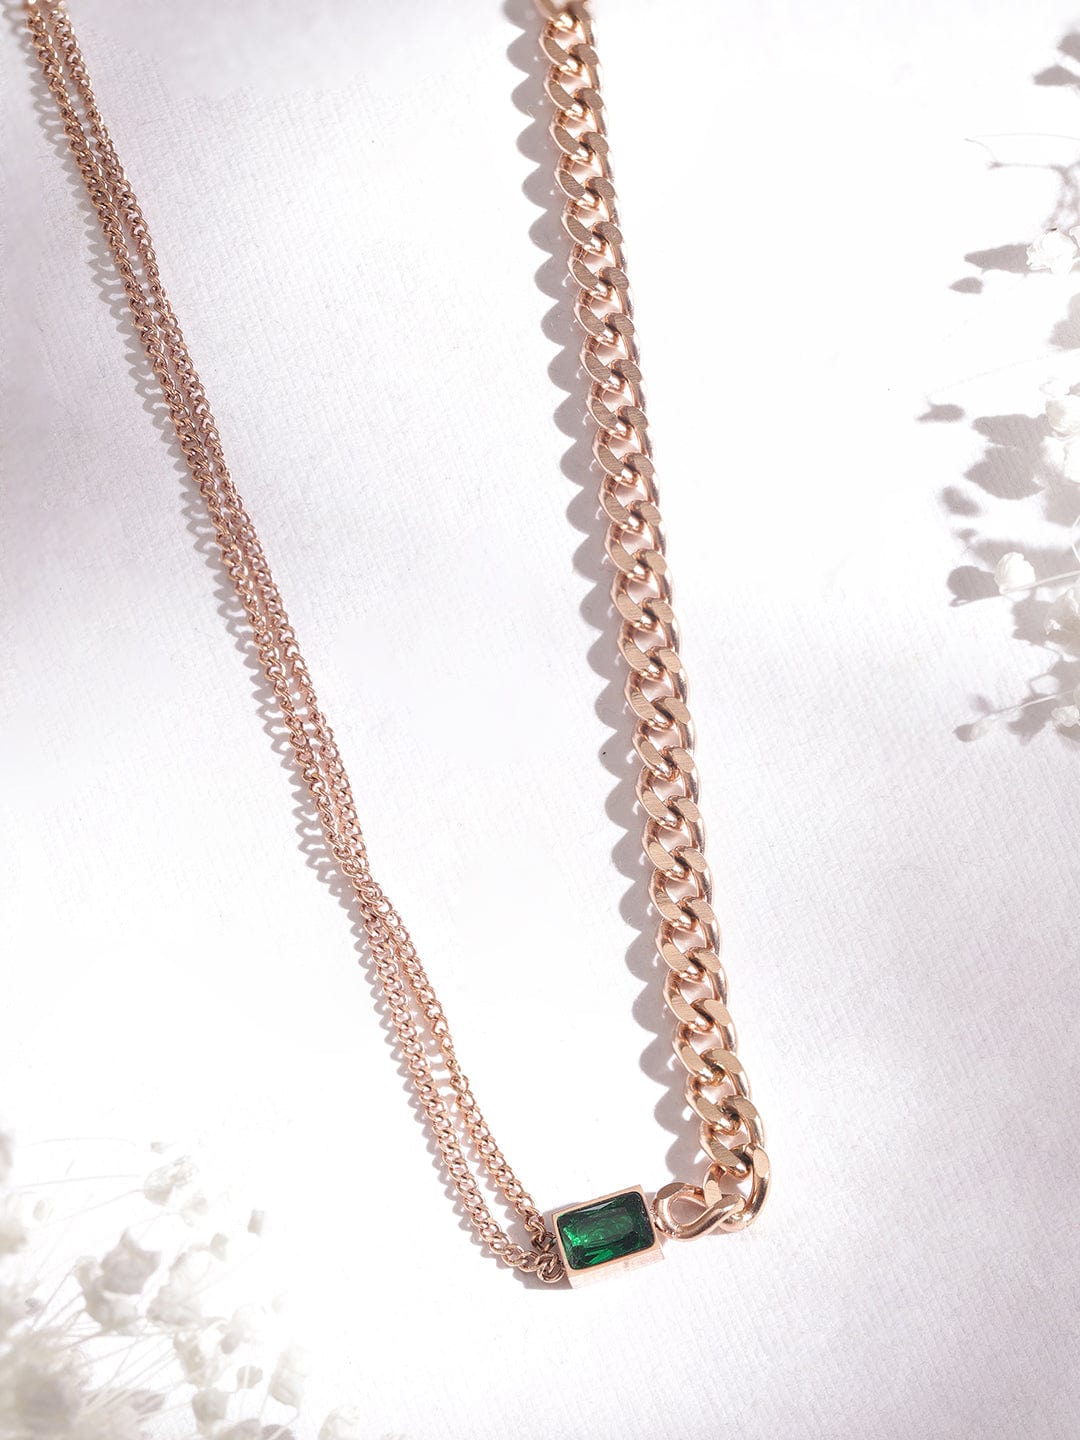 Rubans Voguish Rose Gold Plated Emerald Studded Dual Chained Necklace Necklace and Chains